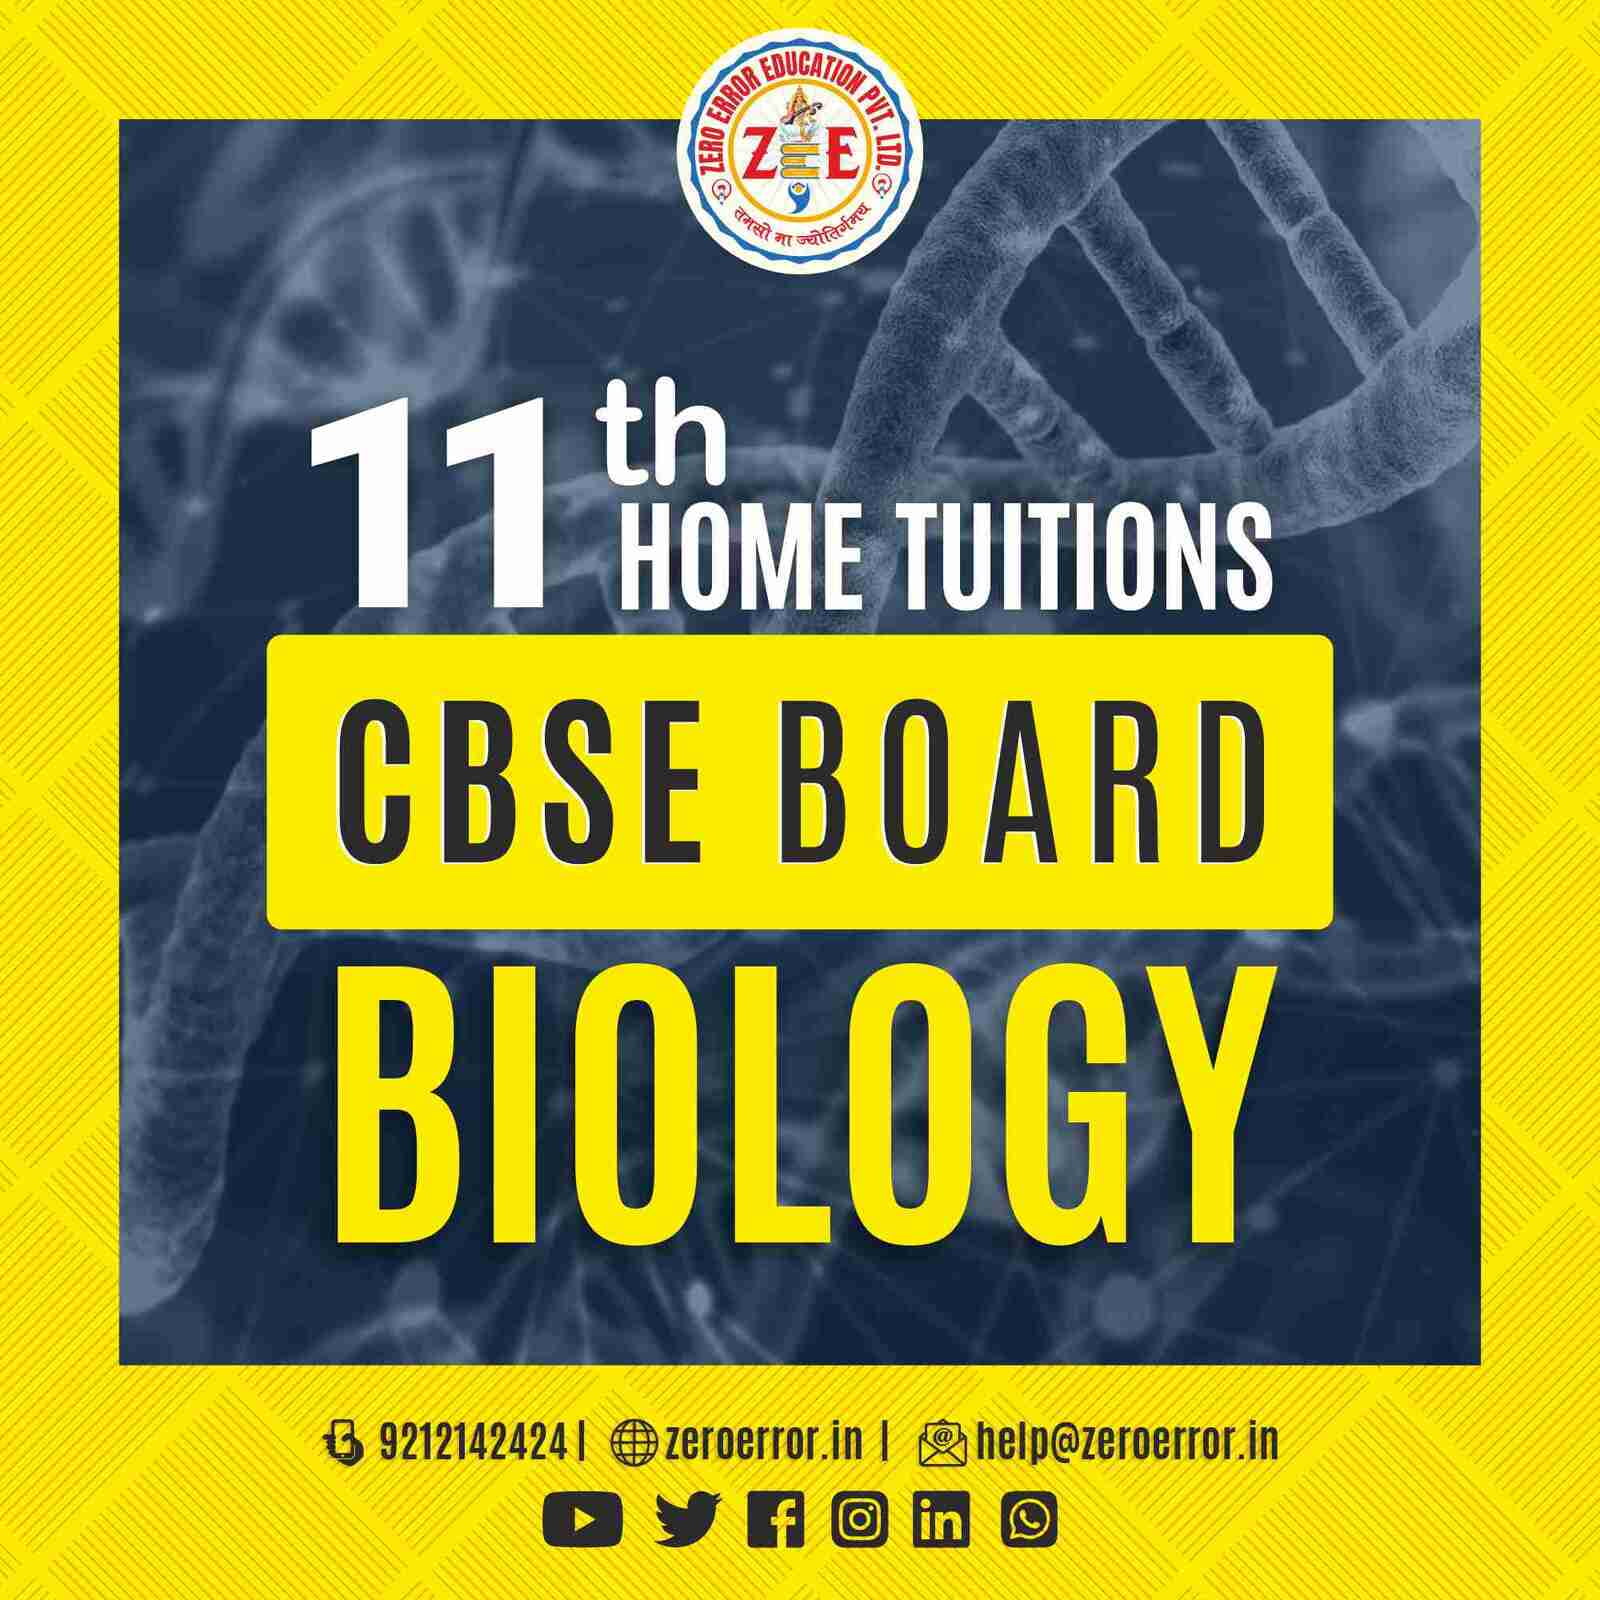 11th Grade CBSE Biology Online Classes by Zero Error Education Prepare for your CBSE board exams with online and offline Biology classes for 11th grade. Learn from experienced home tutors and get all the help you need to succeed. Enroll today at Zero Error Education. [https://zeroerror.in/] Call 9212142424 for more information.